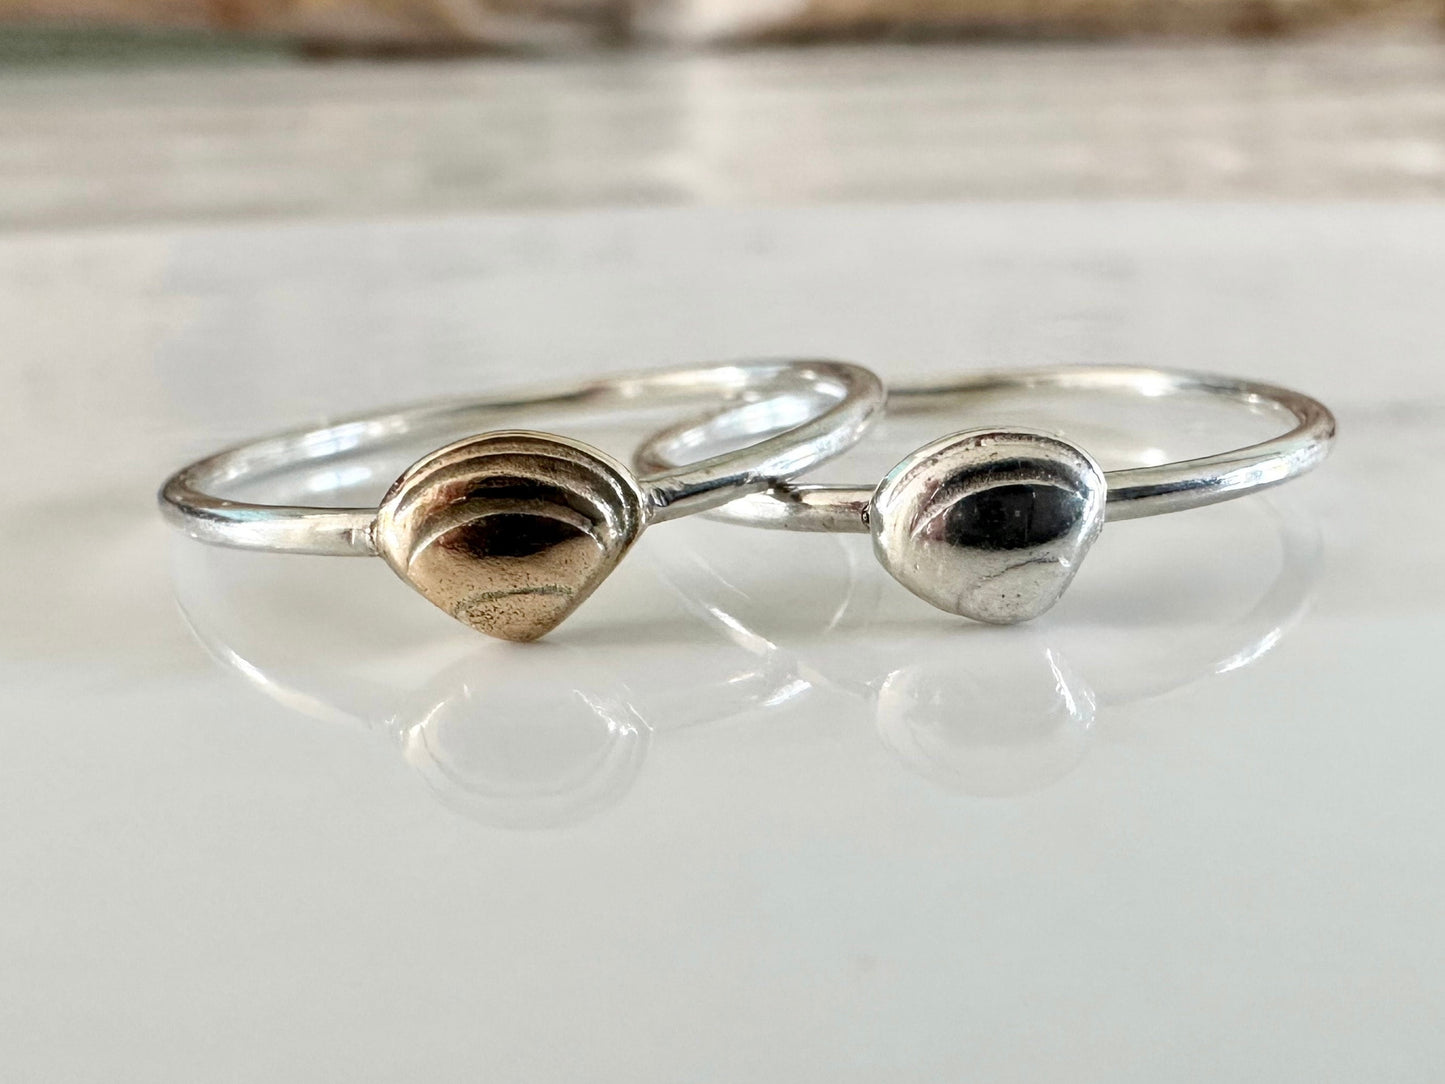 Clam Shell Stacking Ring, Solid 9ct Gold or Sterling Silver Shell on a 1.2mm 925 Sterling Silver Ring Band, Seashell Ring